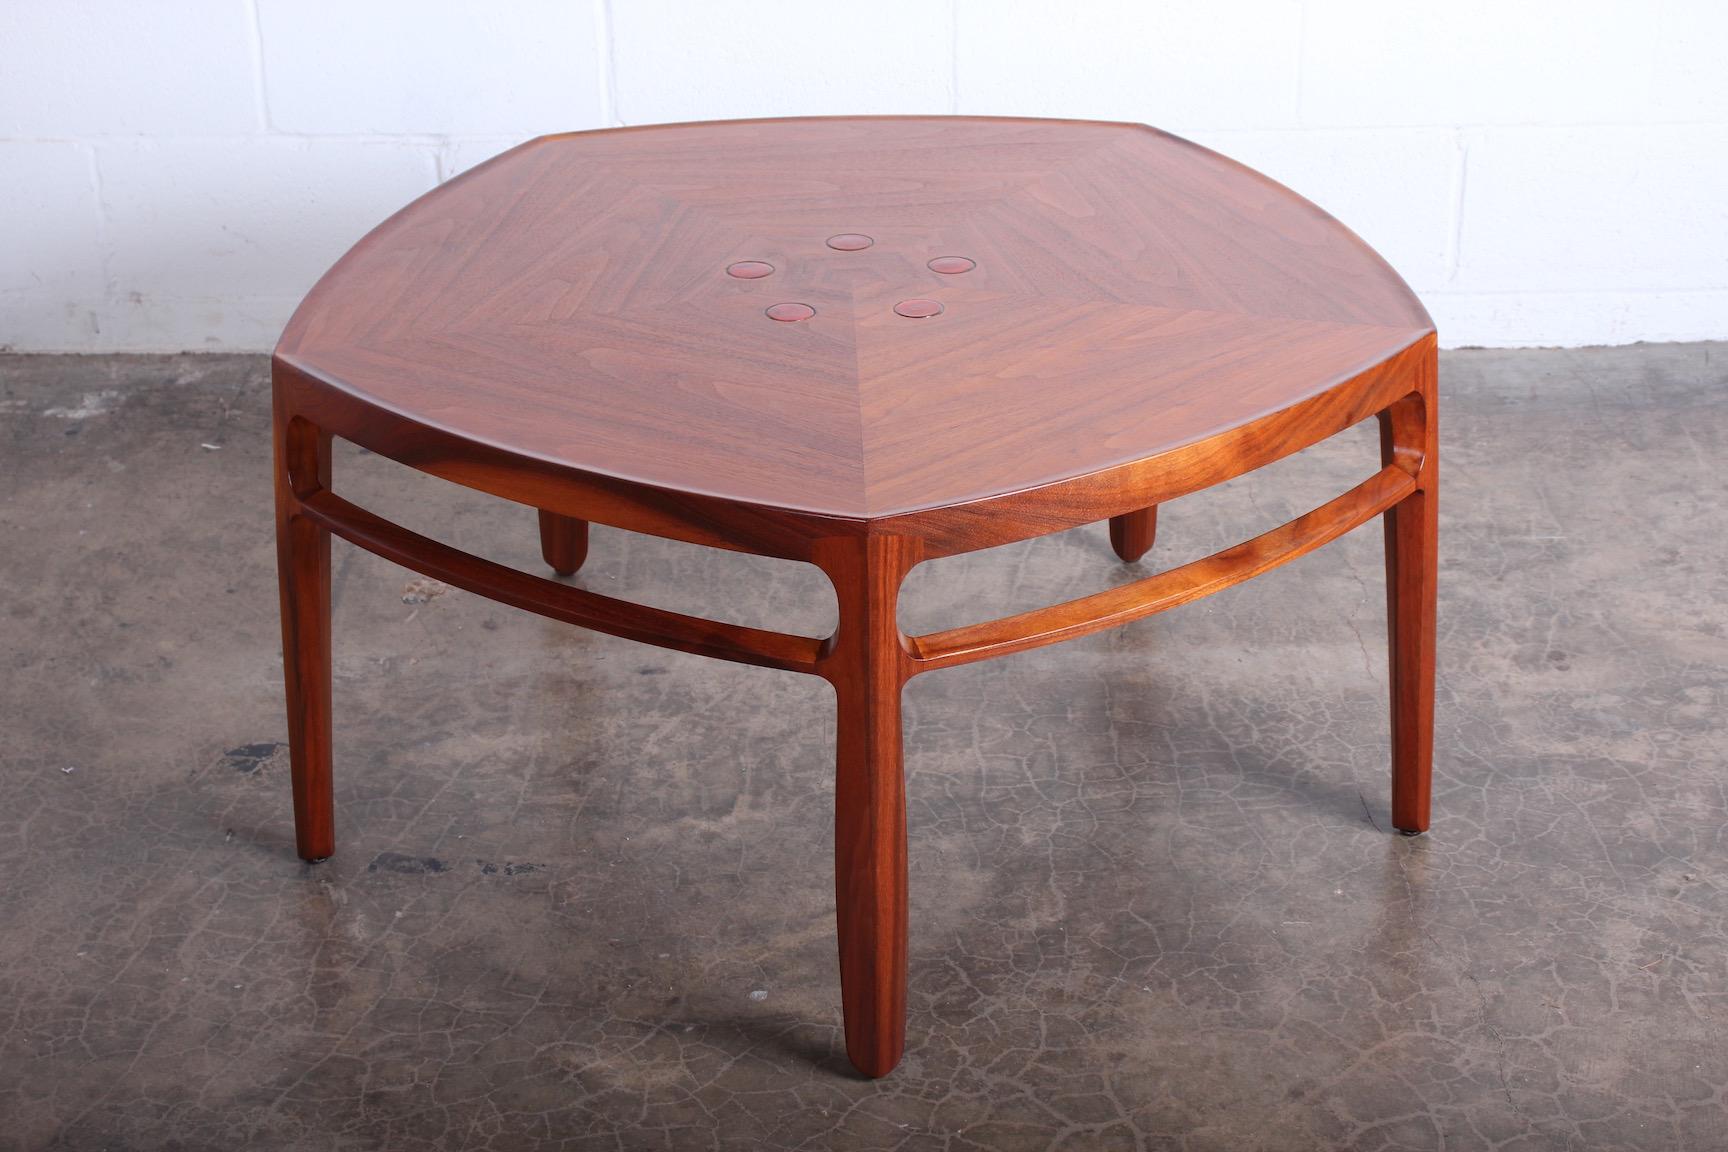 A walnut Janus coffee table with inset ceramic tiles by the Natzlers. Designed by Edward Wormley for Dunbar.